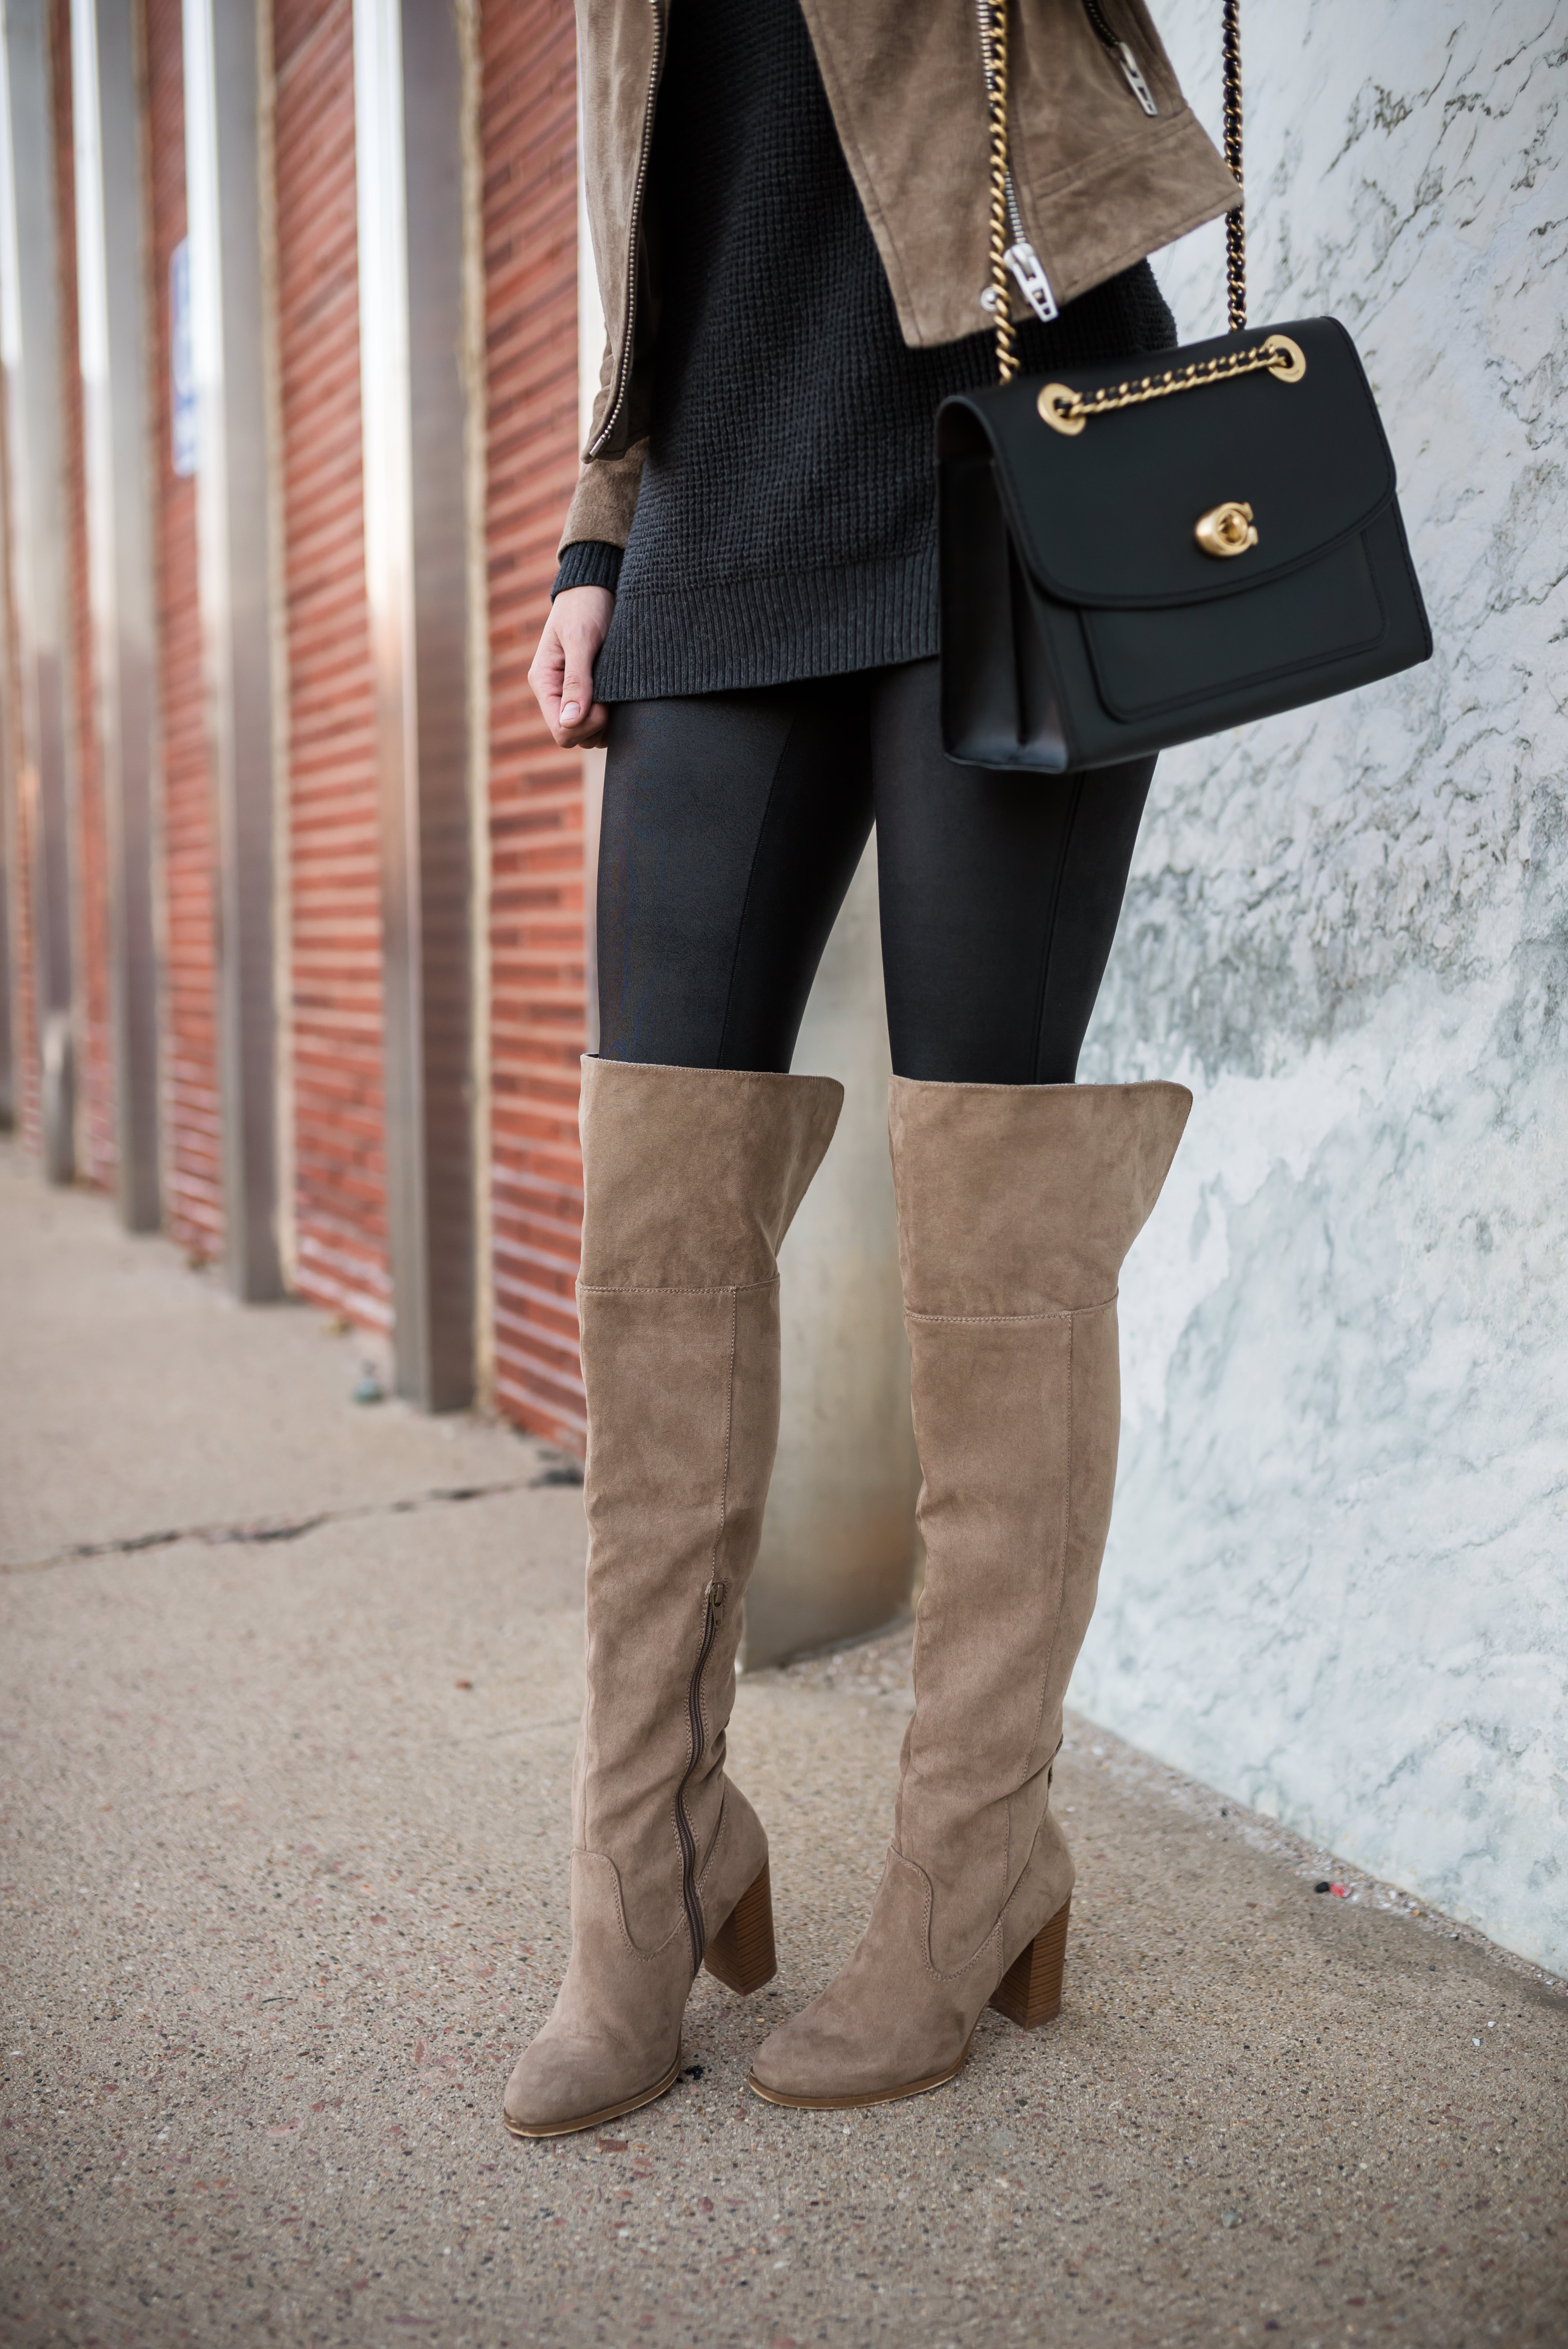 Five Winter Closet Staples | Midwest In Style